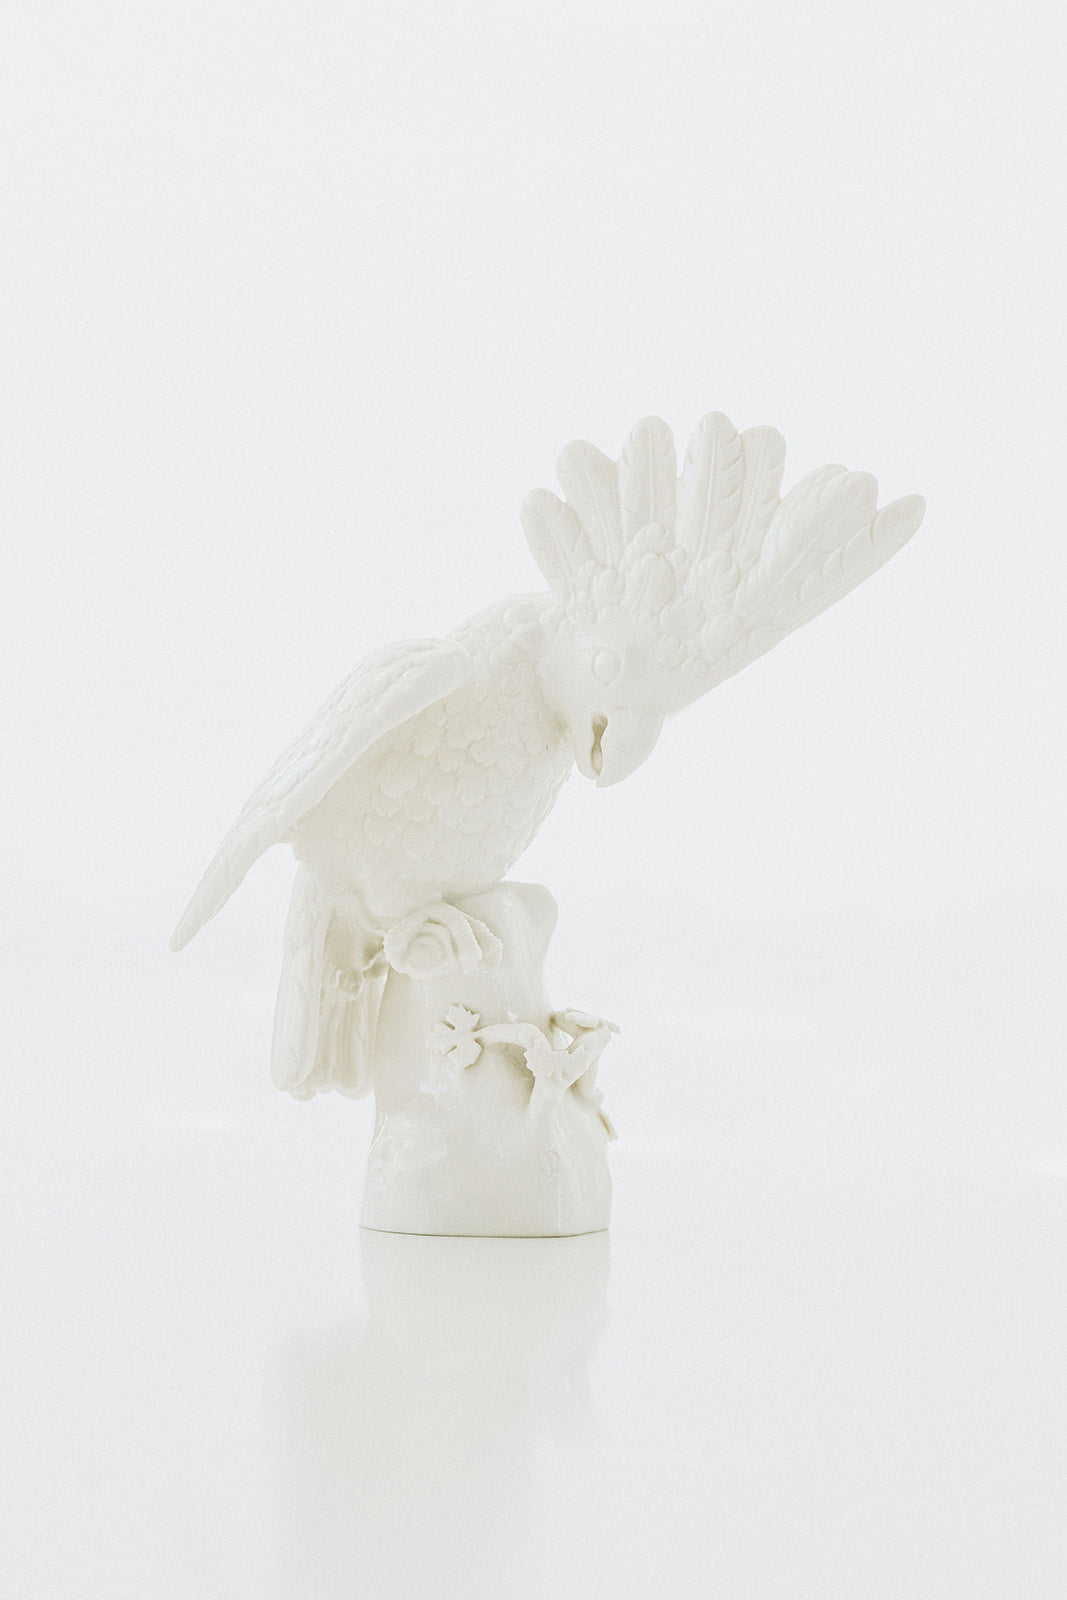 Nymphenburg Porcelain Cockatoo height: approx 13”